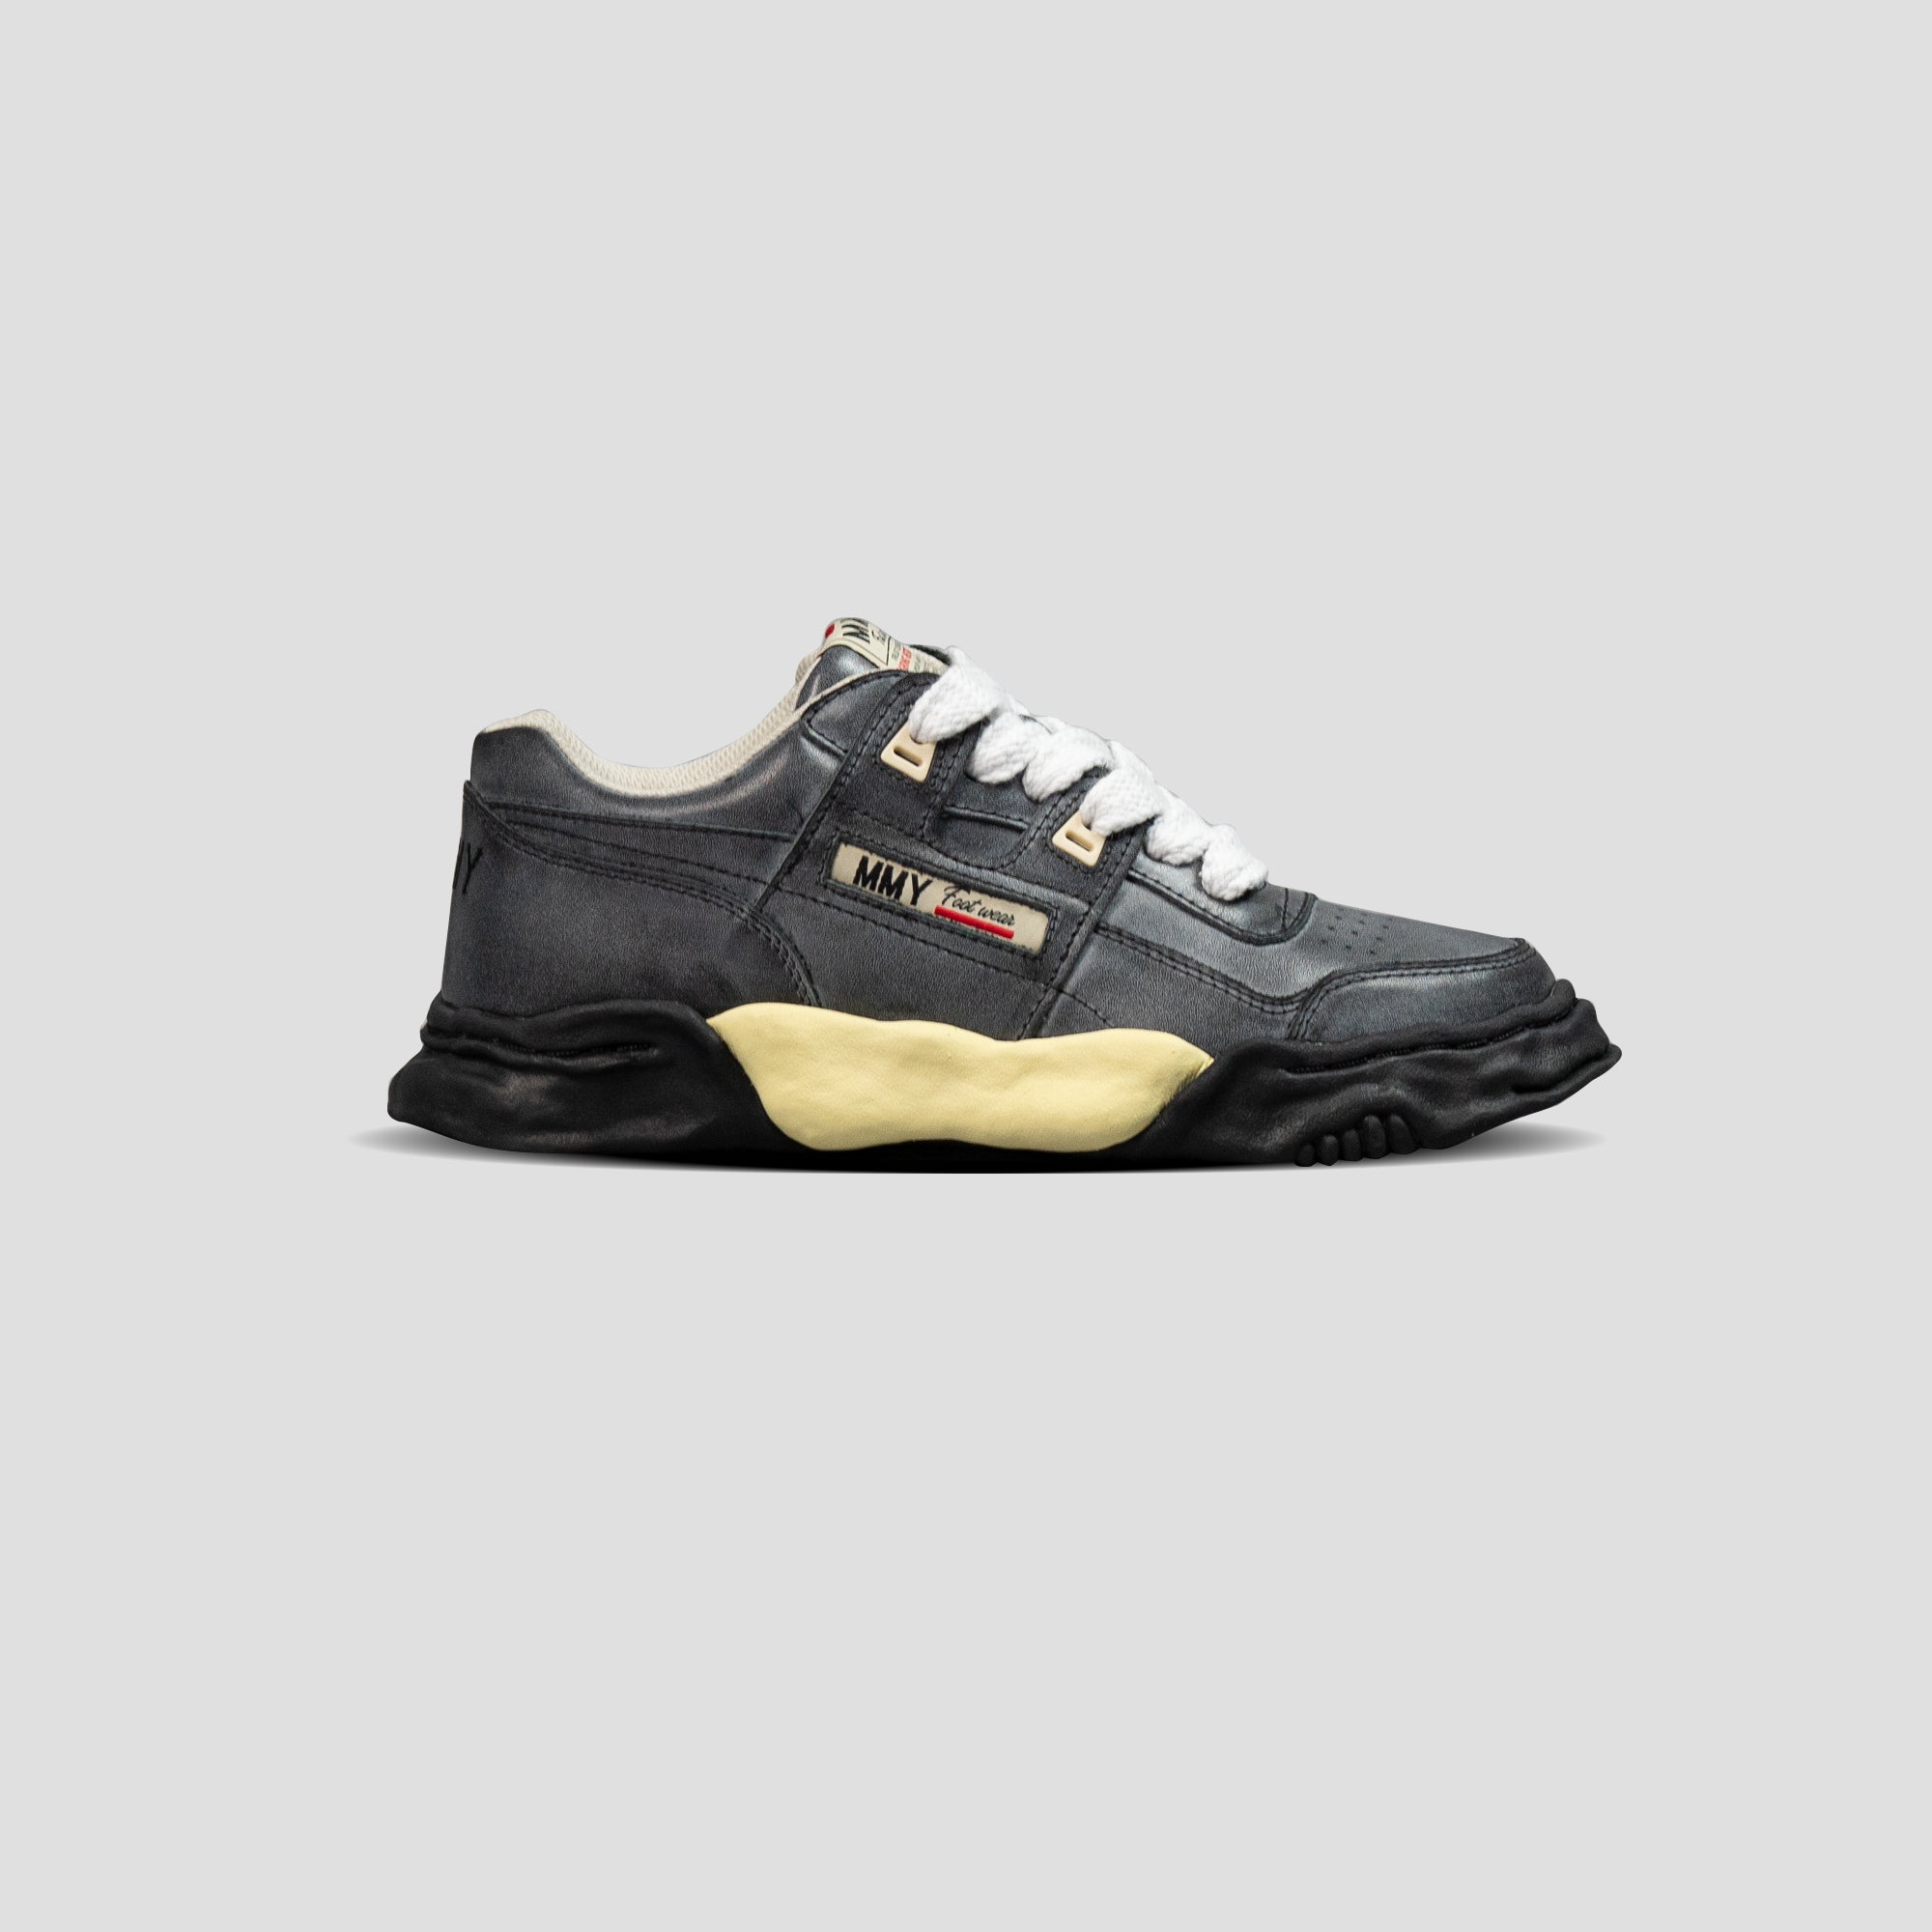 PARKER OG SOLE LOW-TOP PARAFFIN LEATHER SNEAKERS